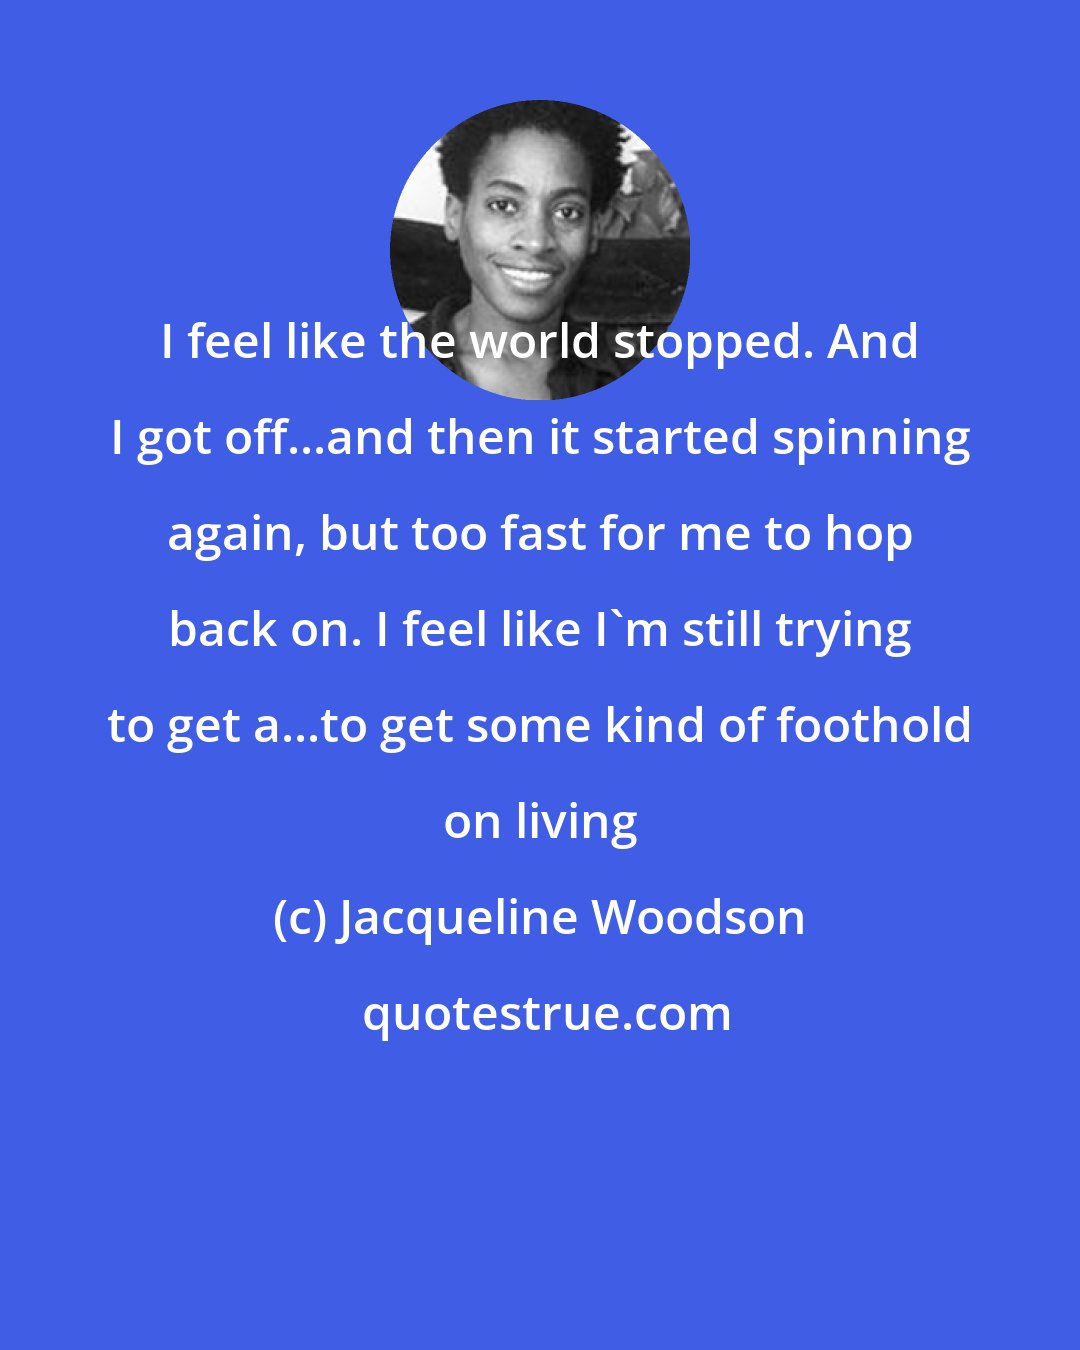 Jacqueline Woodson: I feel like the world stopped. And I got off...and then it started spinning again, but too fast for me to hop back on. I feel like I'm still trying to get a...to get some kind of foothold on living